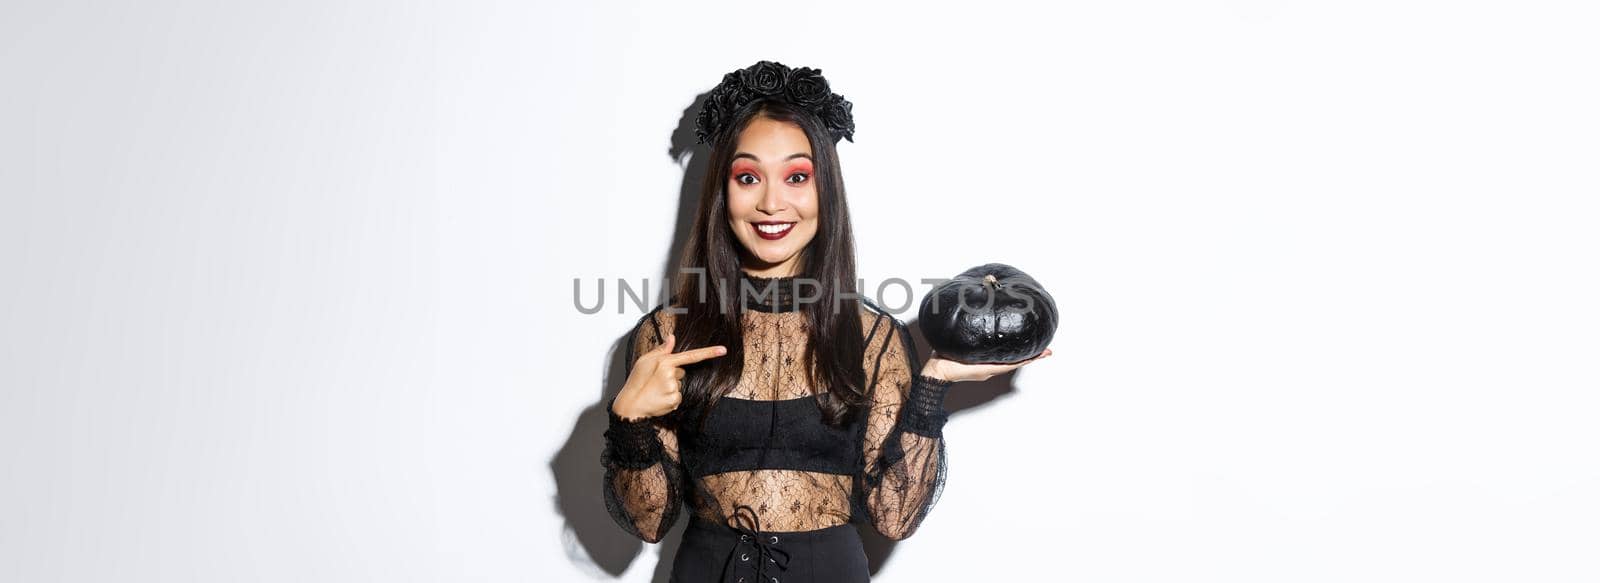 Surprised happy asian woman in witch costume pointing finger at black pumpkin, smiling amused, getting ready for halloween party, standing over white background.